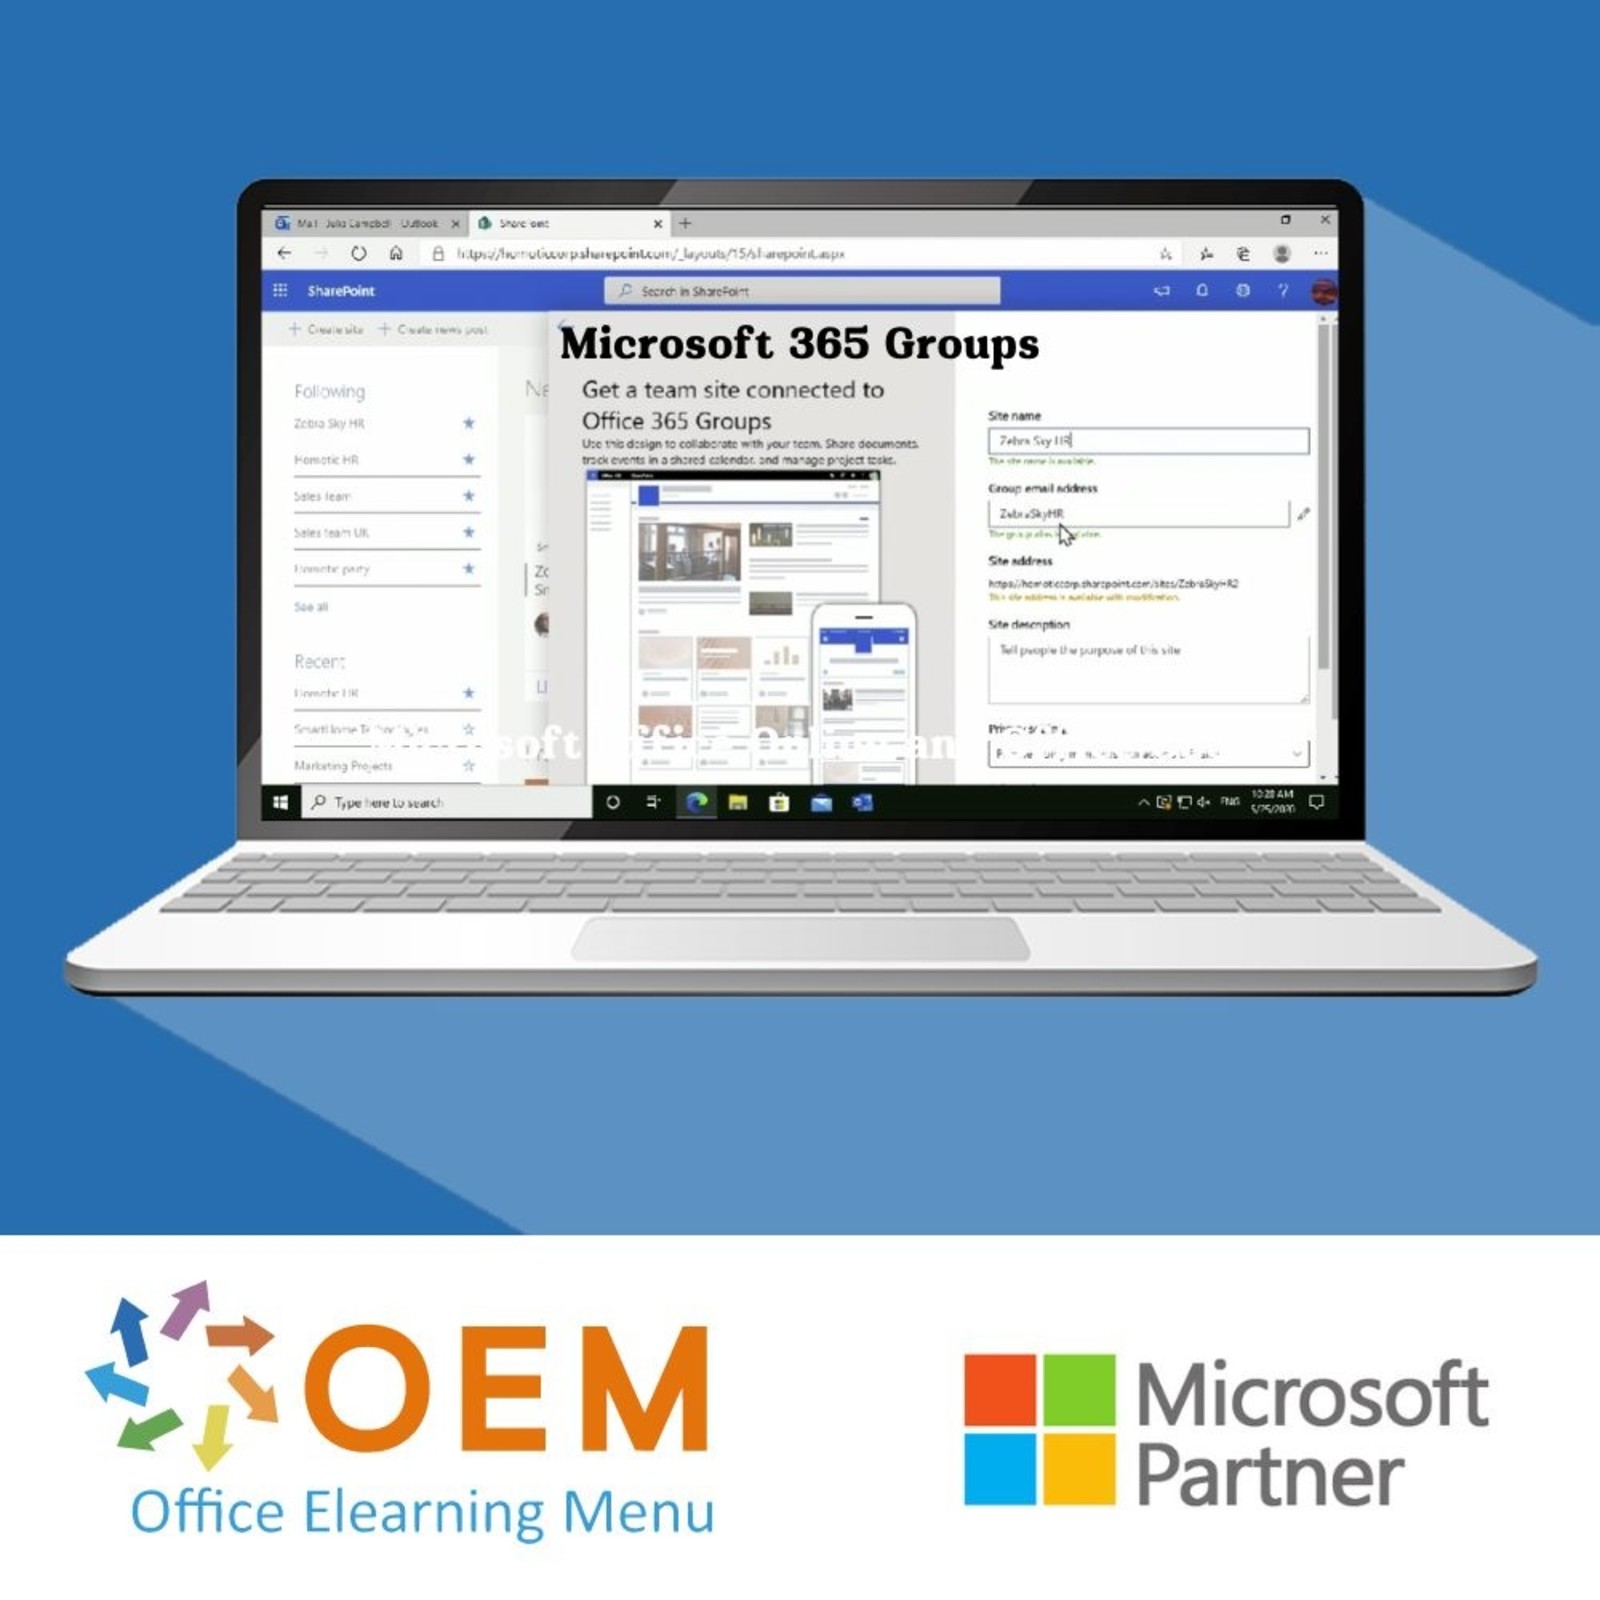 Microsoft Office 365 Microsoft 365 Groups Course E-Learning